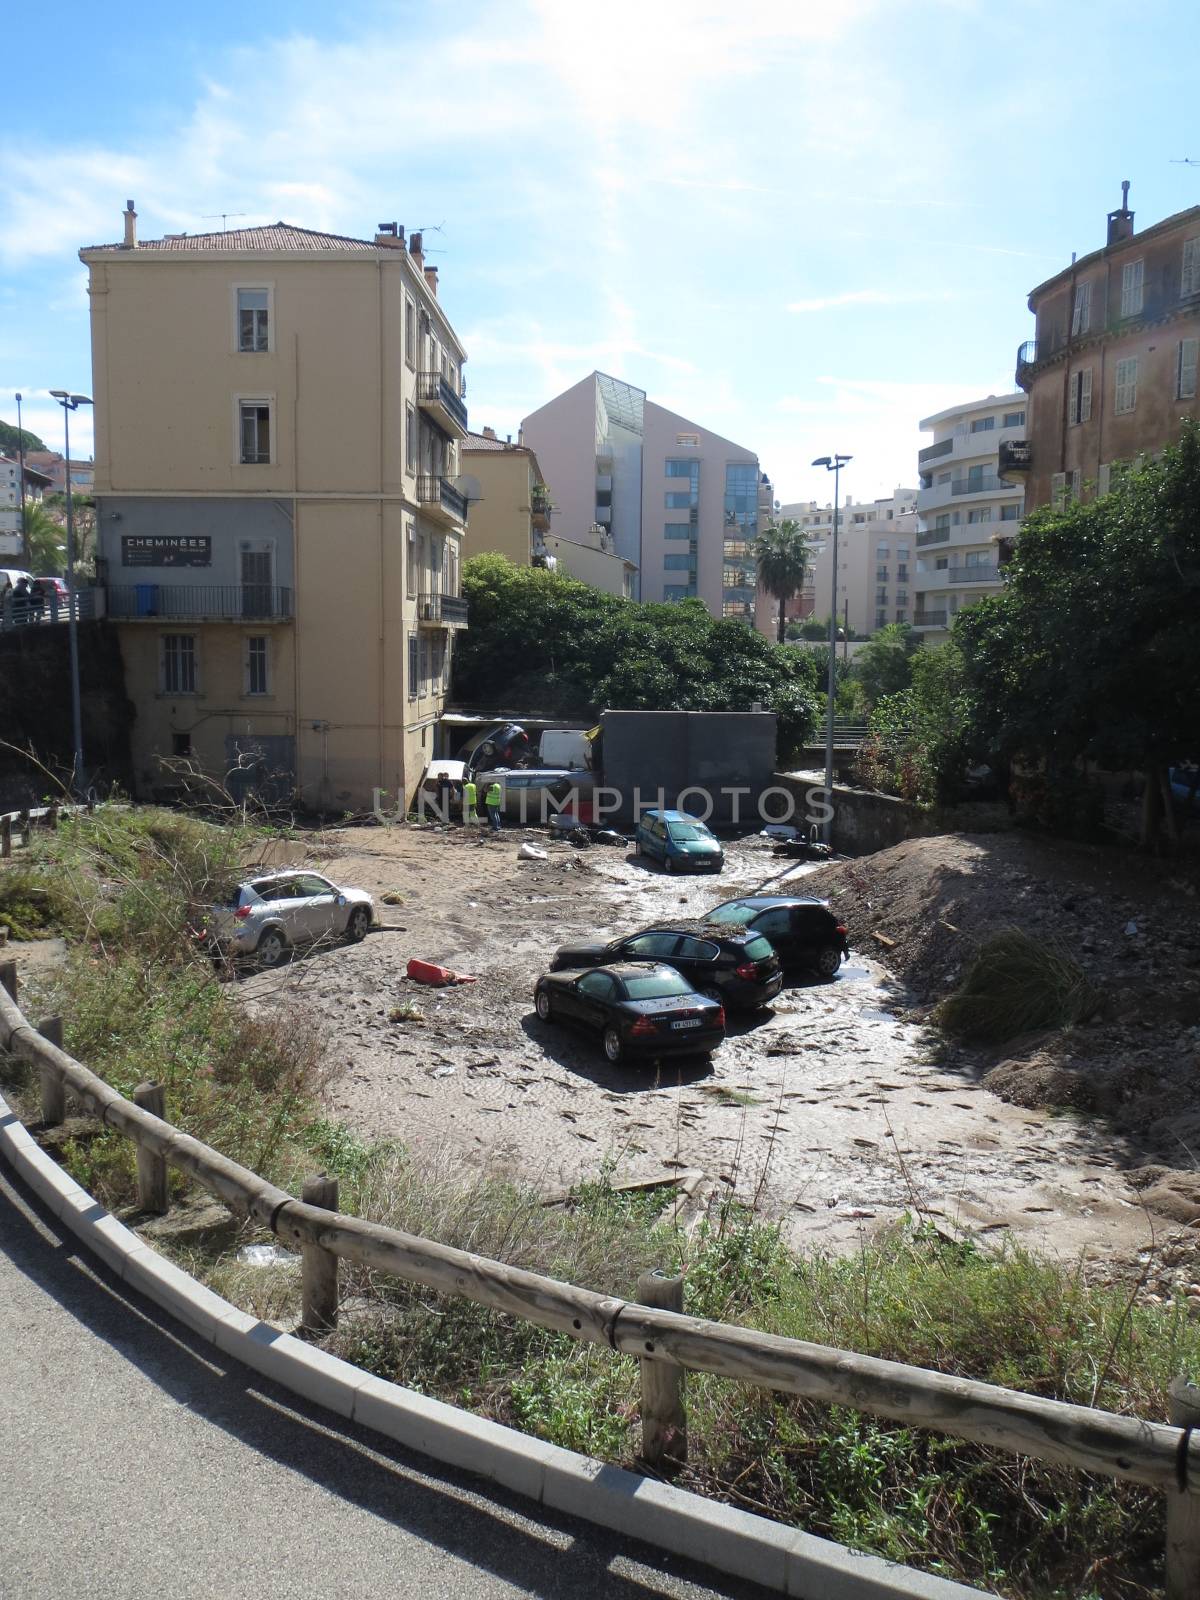 FRANCE, Cannes : Some cars piled up in a street in Cannes, southern France, on October 4th, 2015 after fatal flooding. Deluge due to violent storms in the region of Alpes-Maritimes happened in the night between October 3rd and 4th, 2015, and caused the death of at least 17 people. 